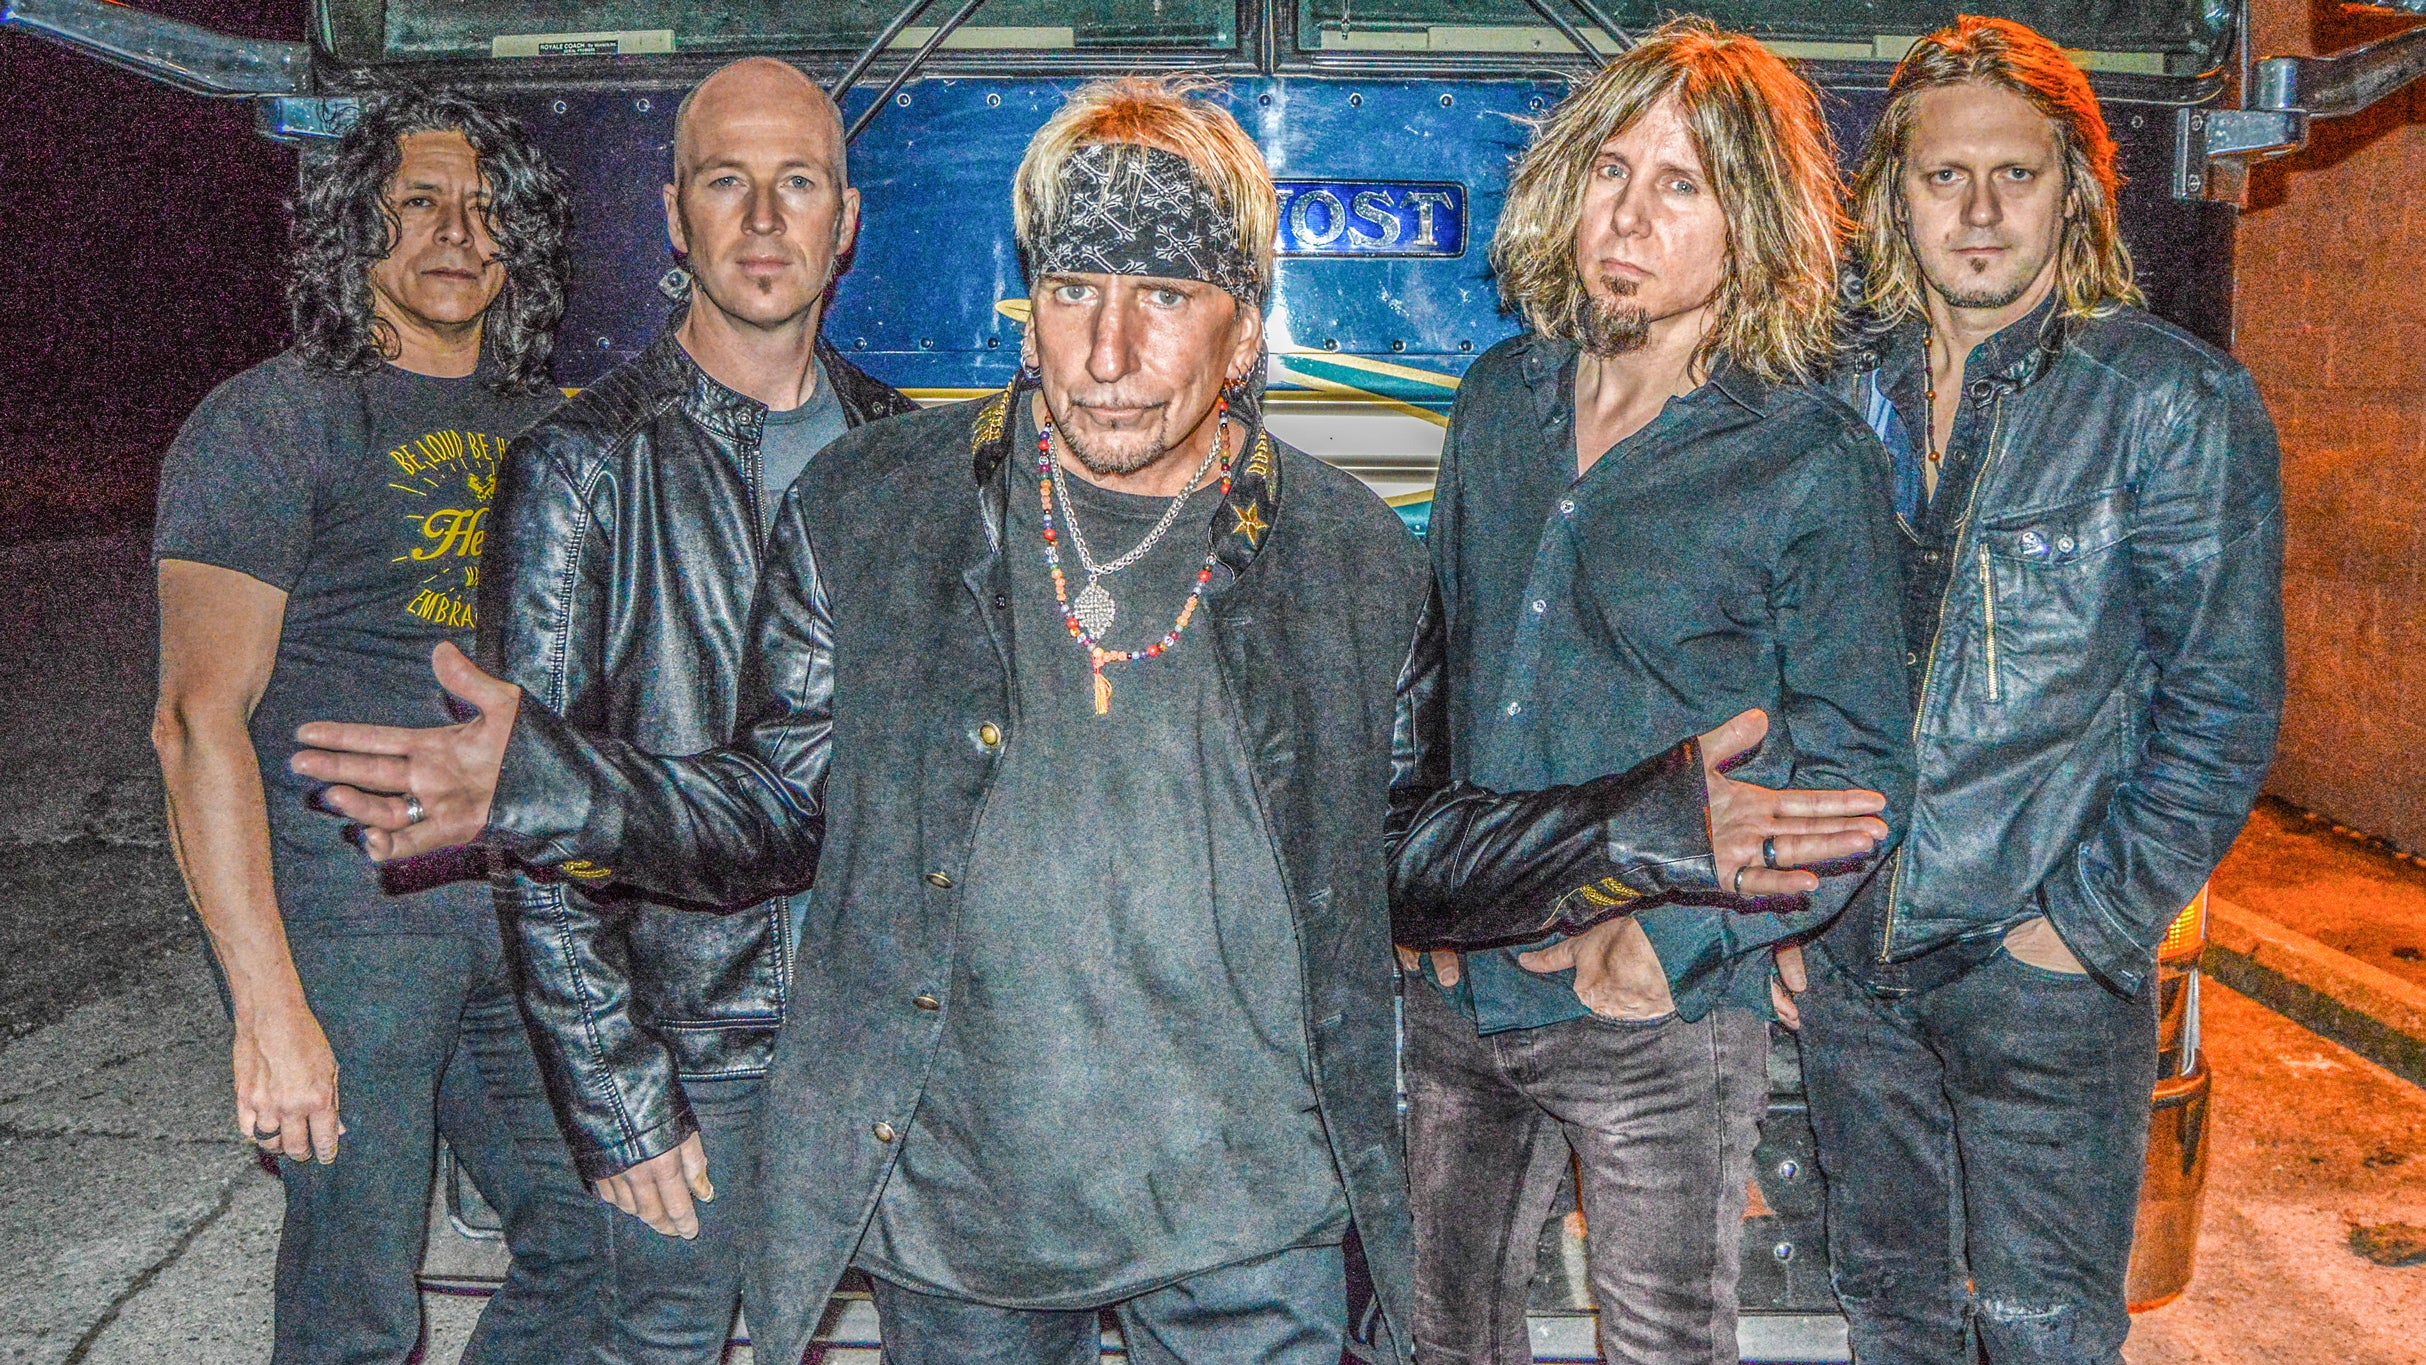 Jack Russell's Great White in Jackpot promo photo for Social Media presale offer code